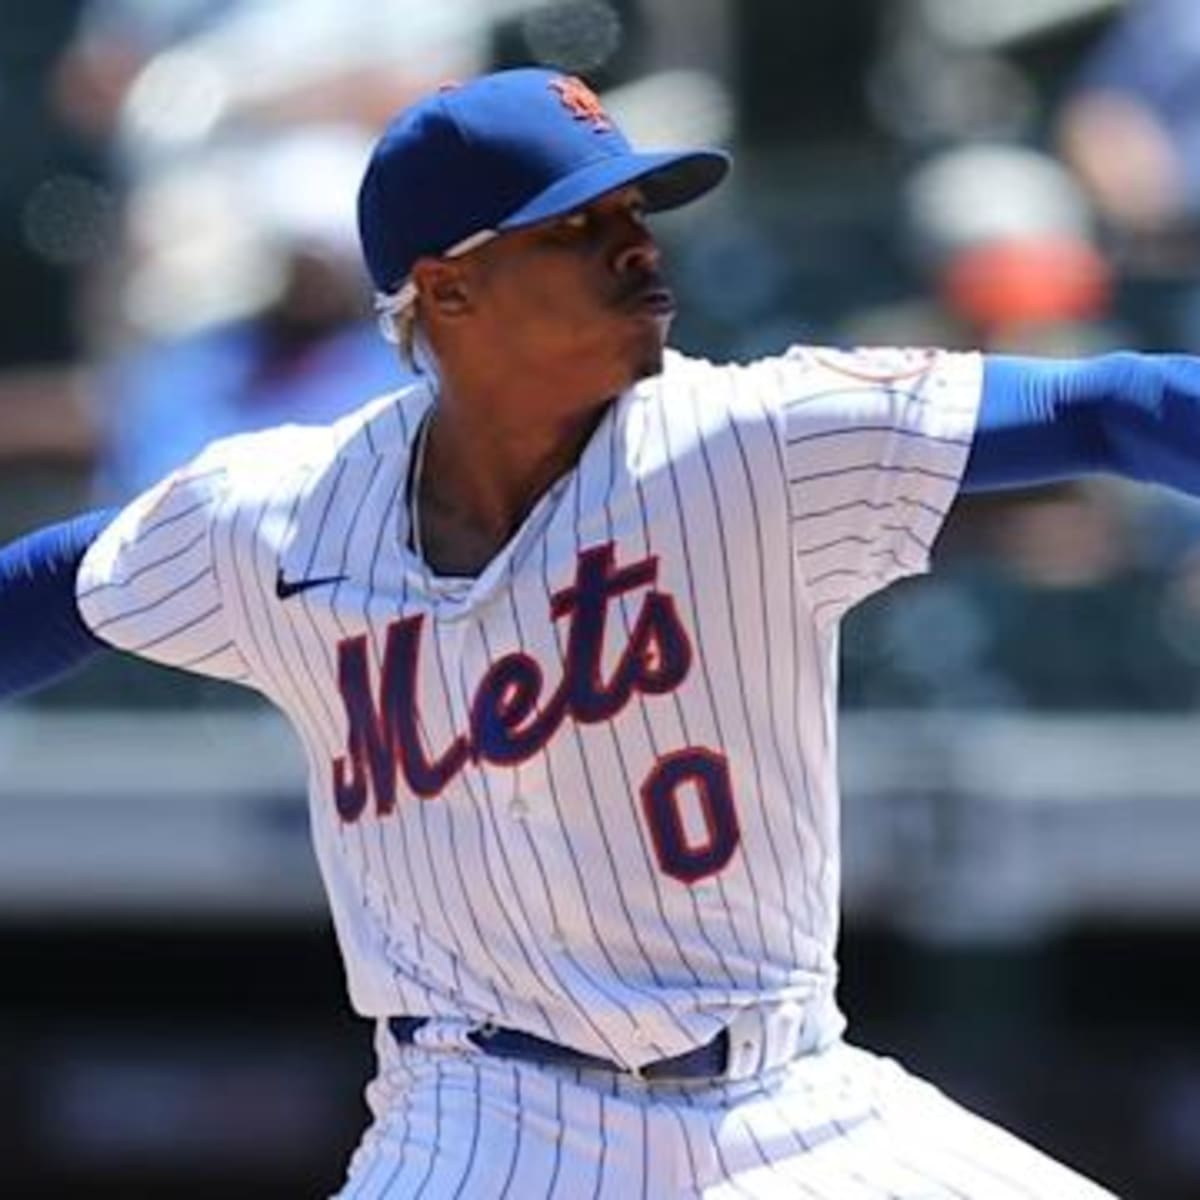 How Mets' Marcus Stroman became must-see baseball show